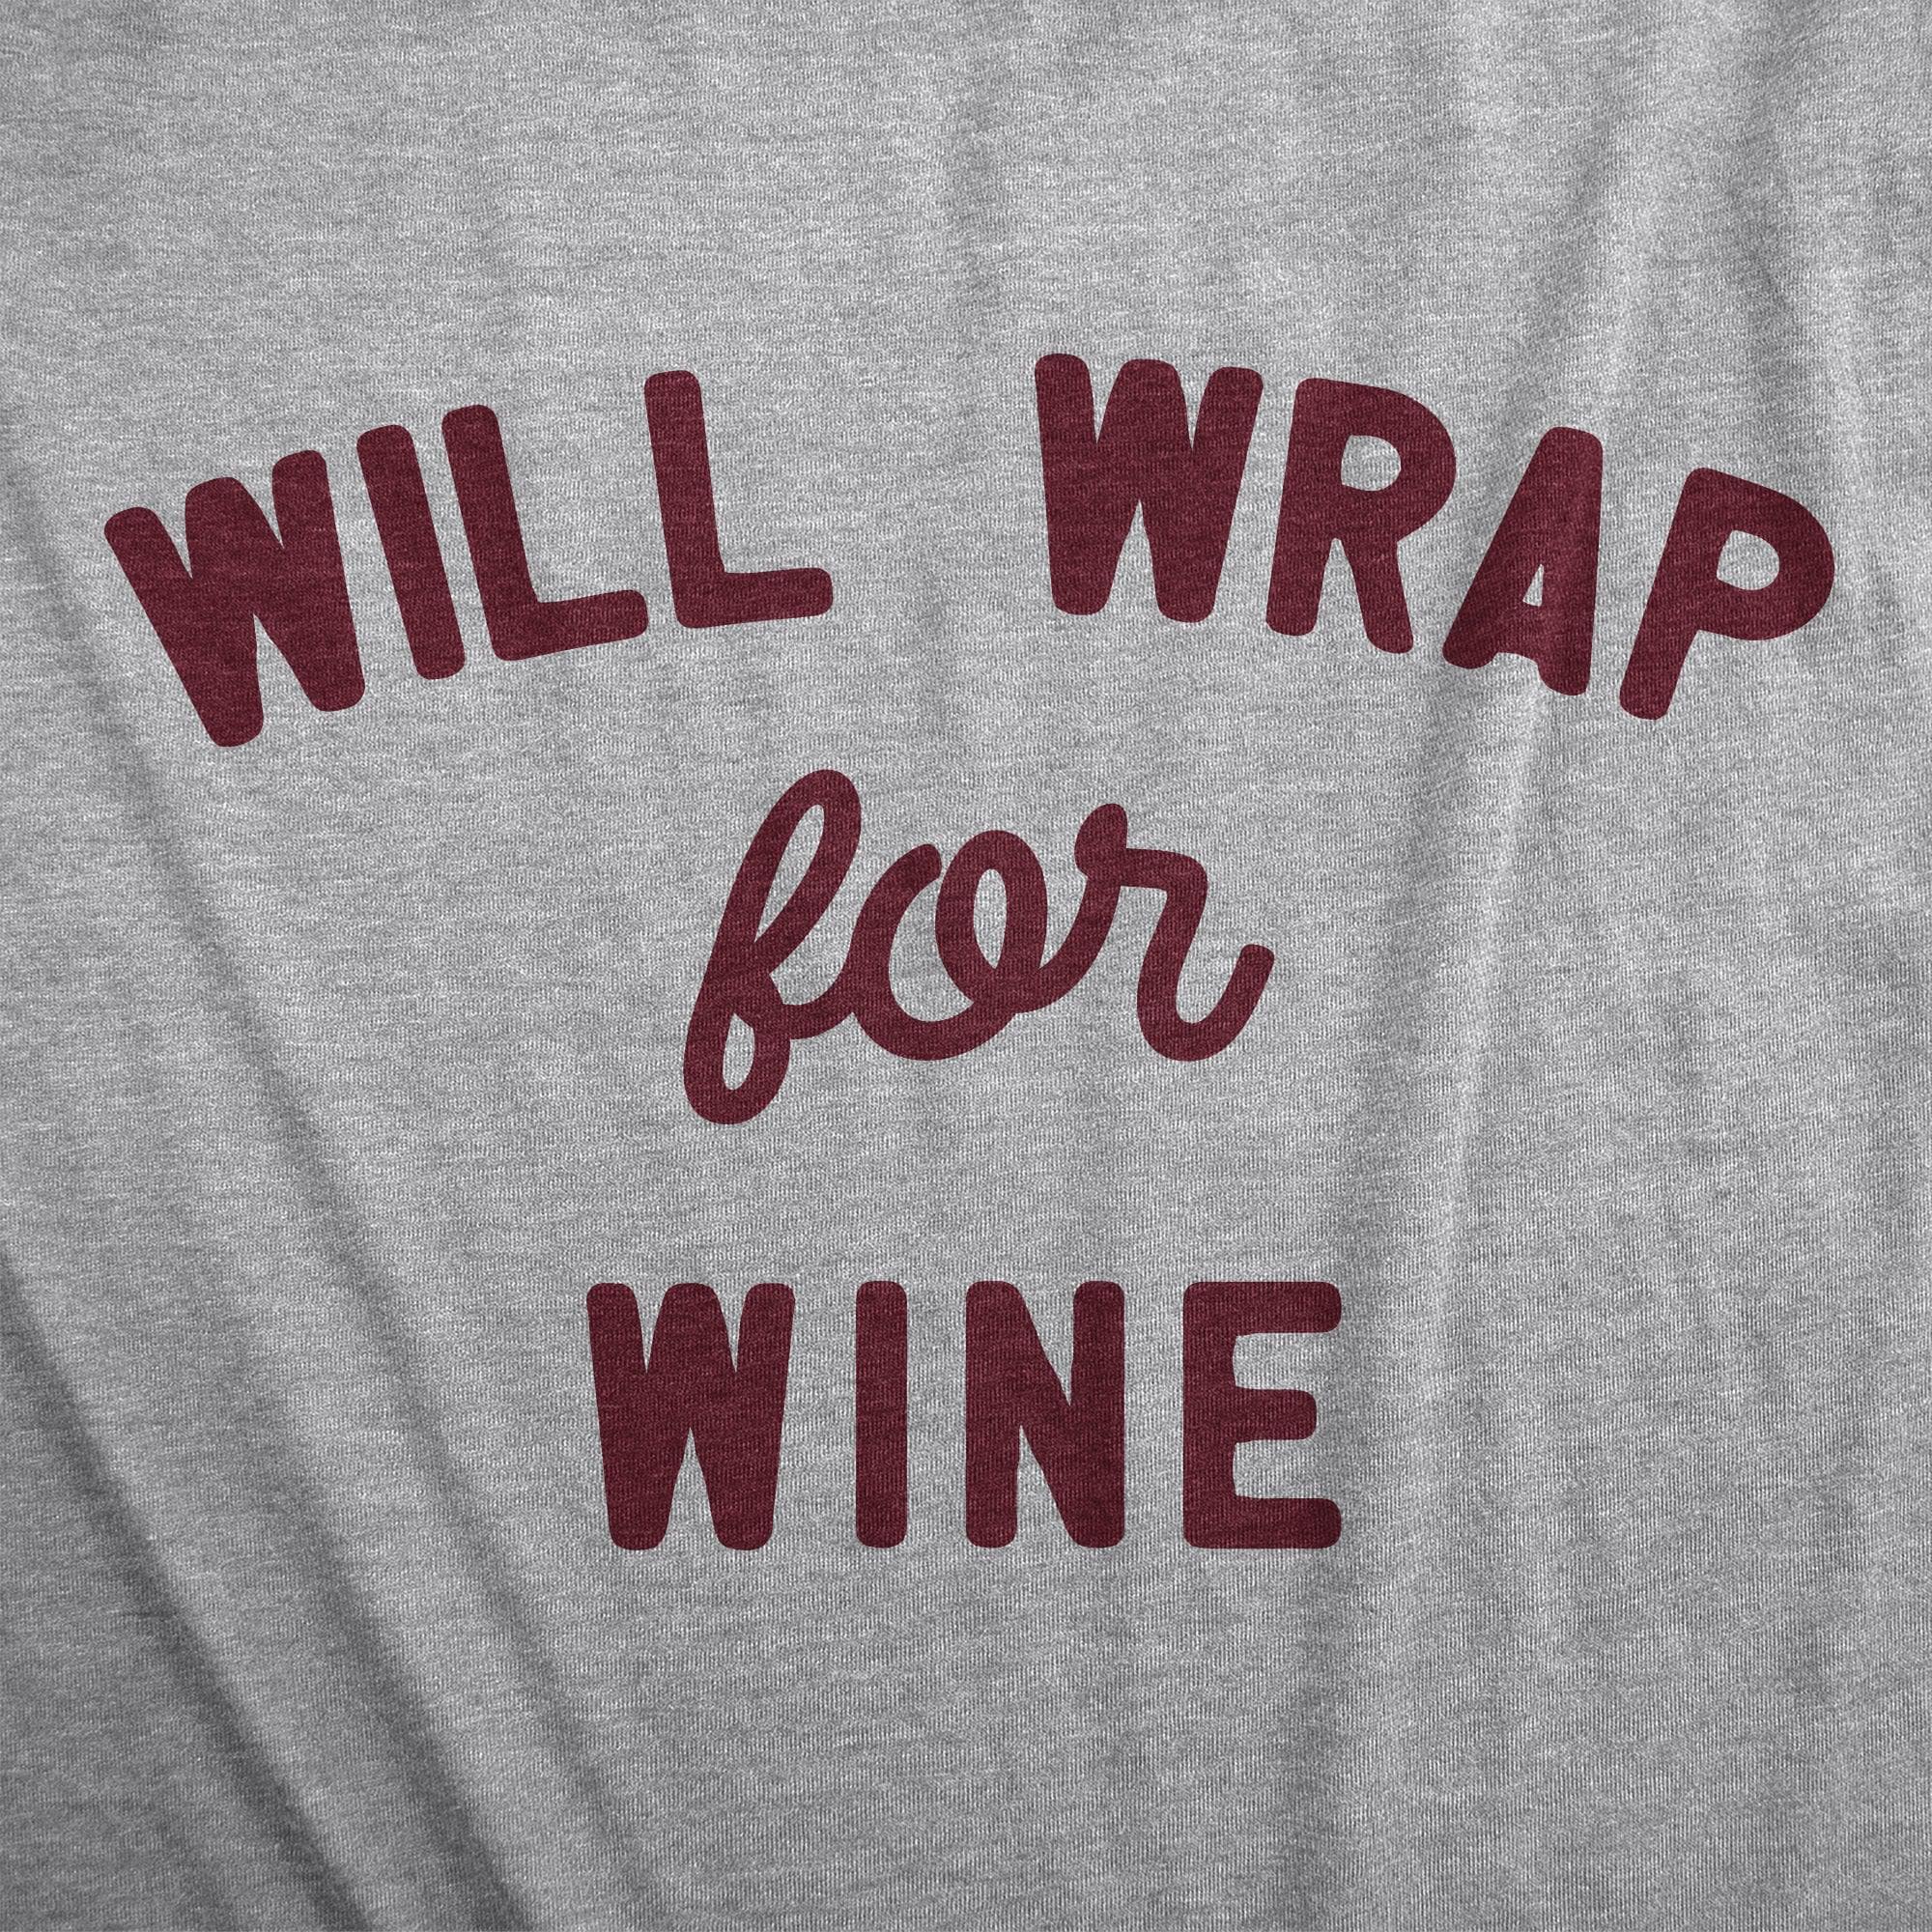 Will Wrap For Wine Women's Tshirt  -  Crazy Dog T-Shirts